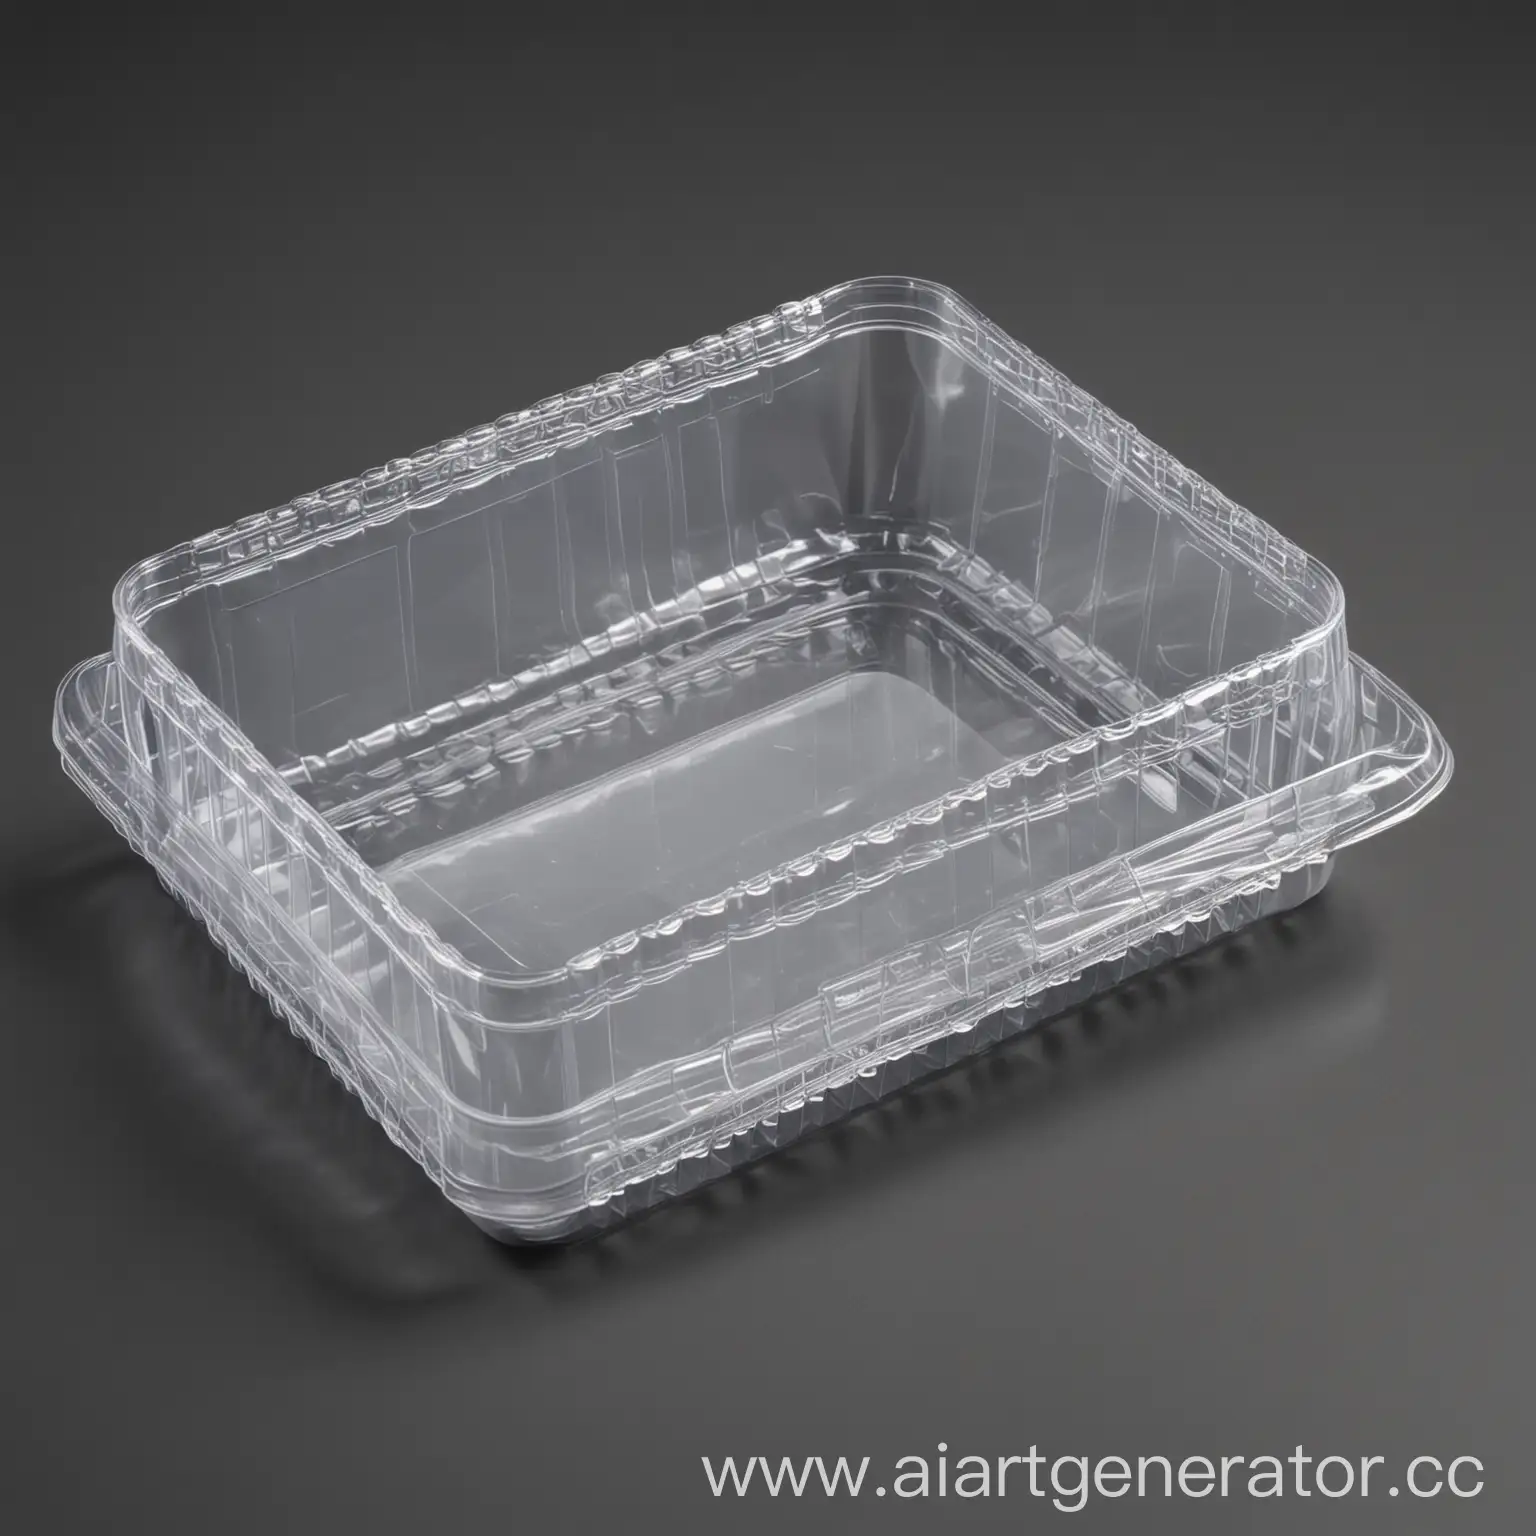 Transparent-Rectangular-Food-Packaging-Without-Lid-on-Transparent-Background